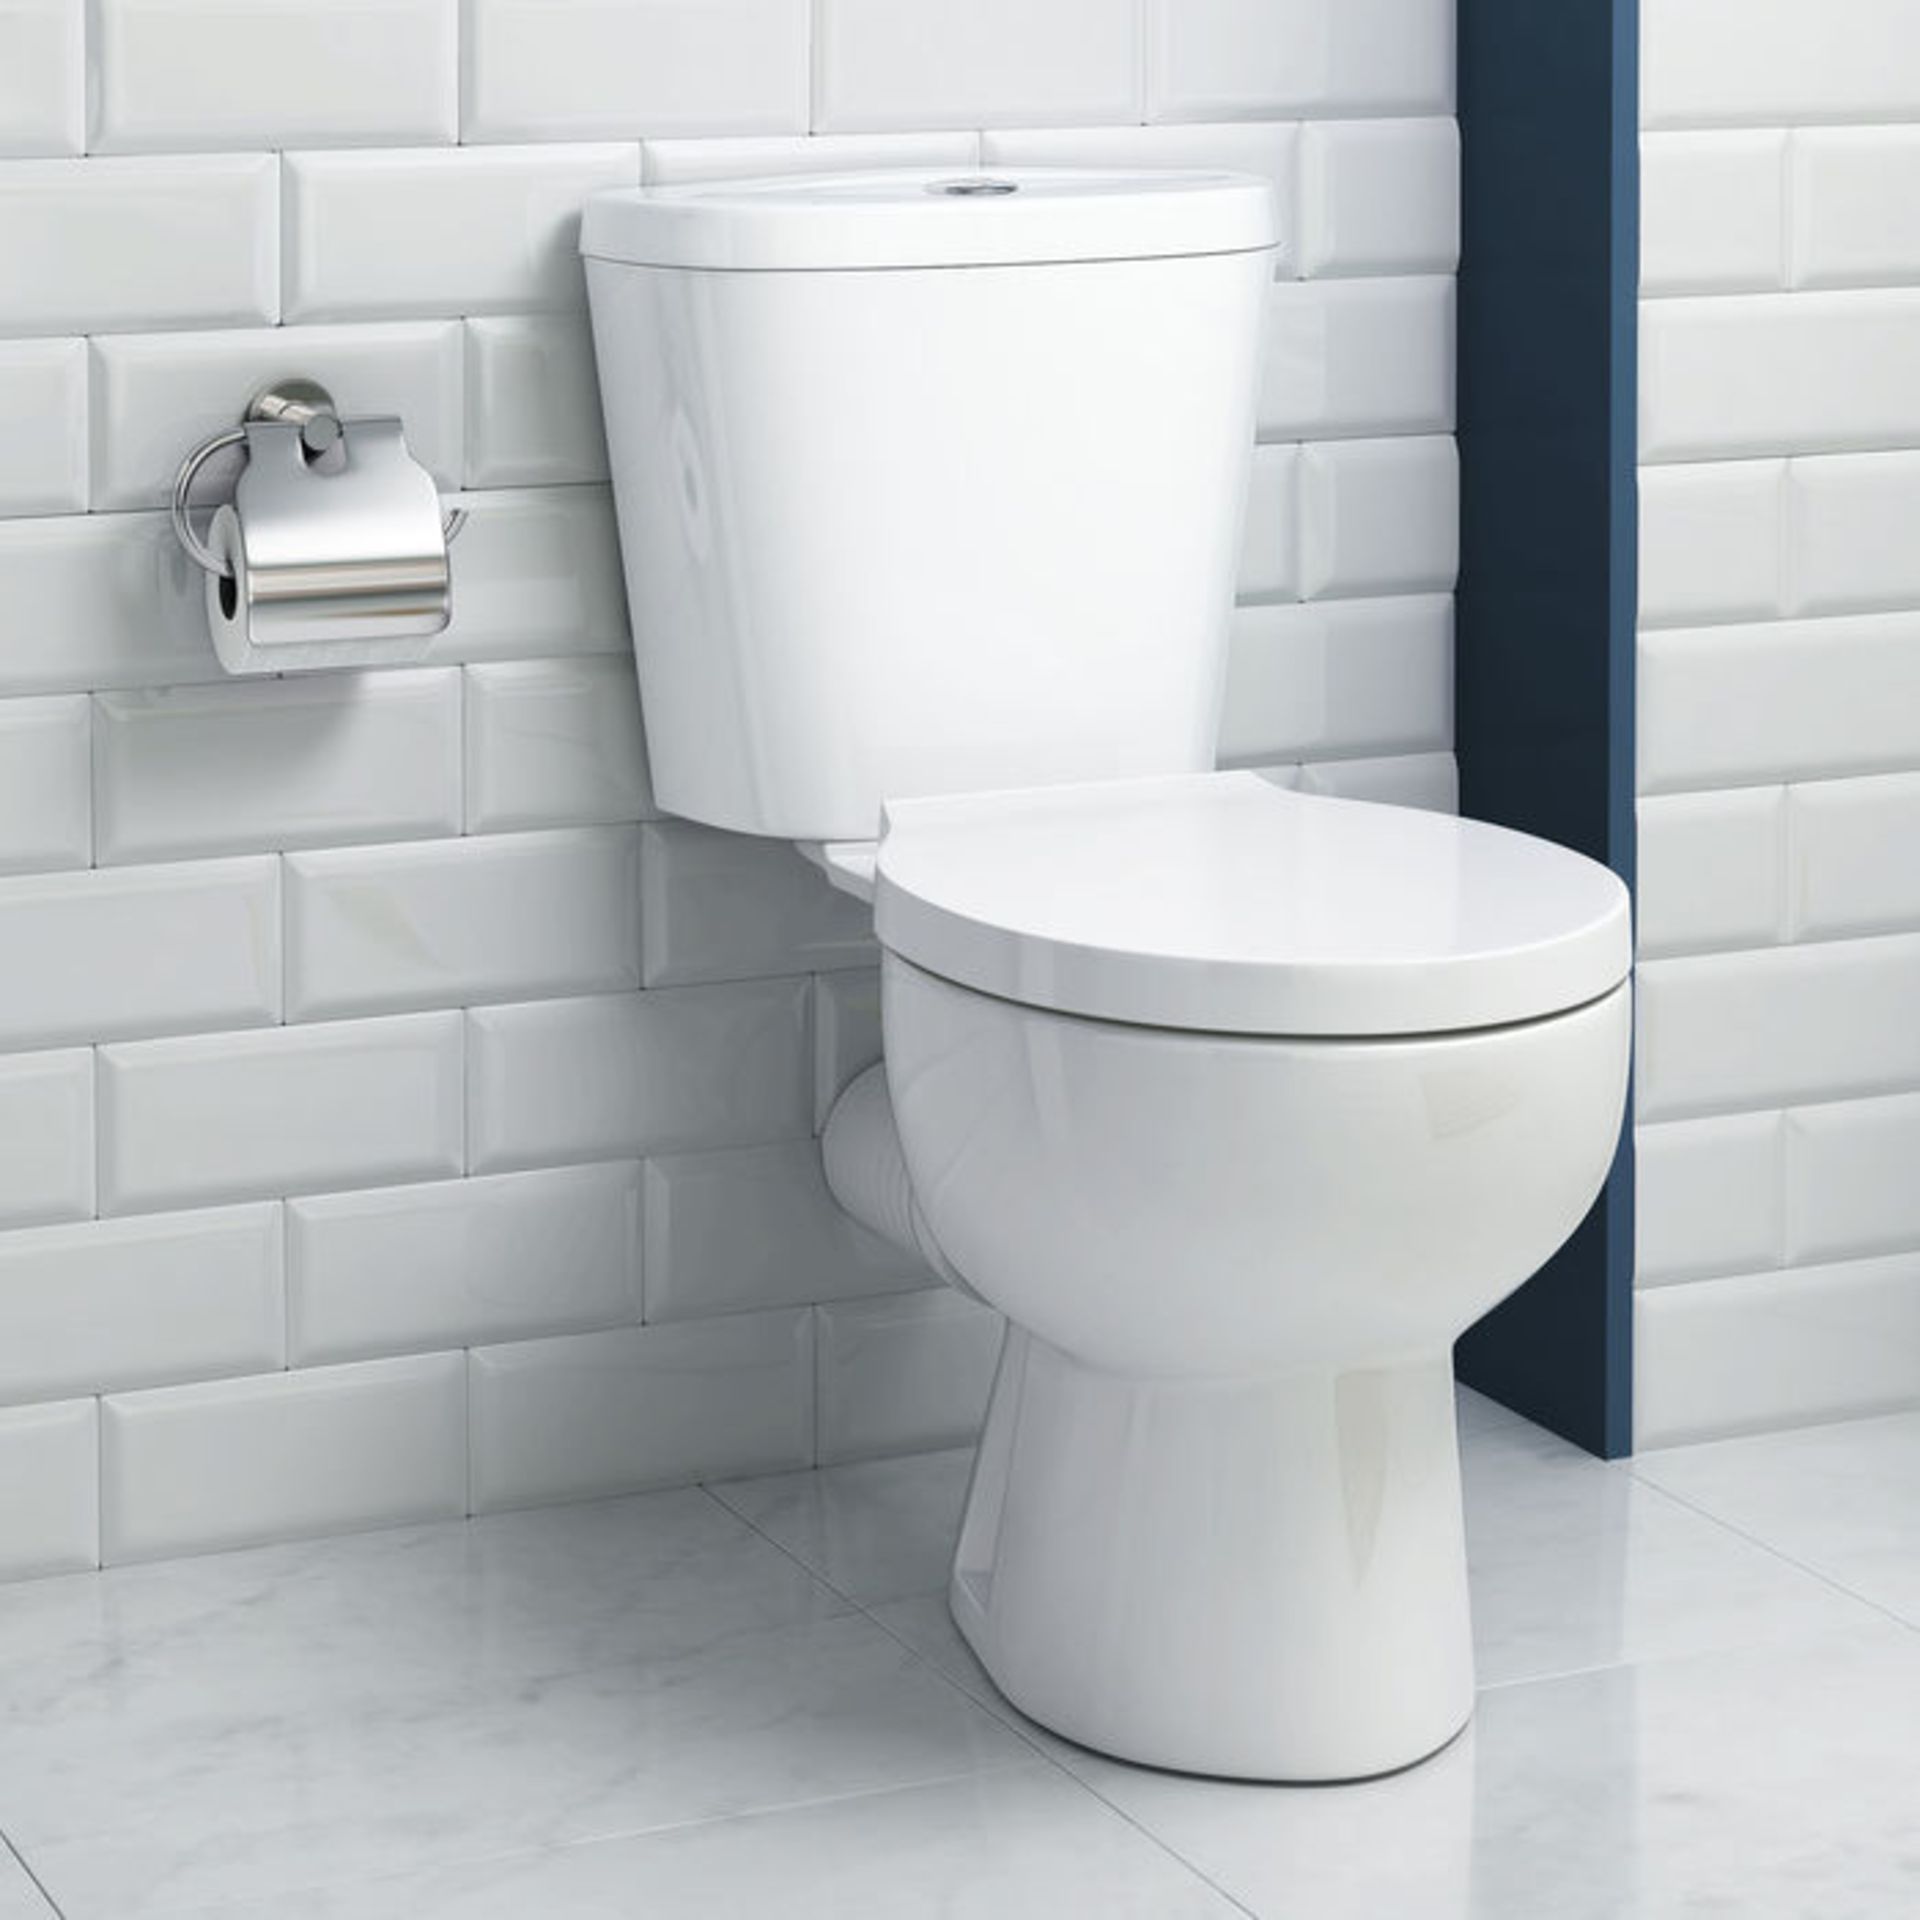 (NV65) Quartz Close Coupled Toilet.. We love this because it is simply great value! Made from W...(